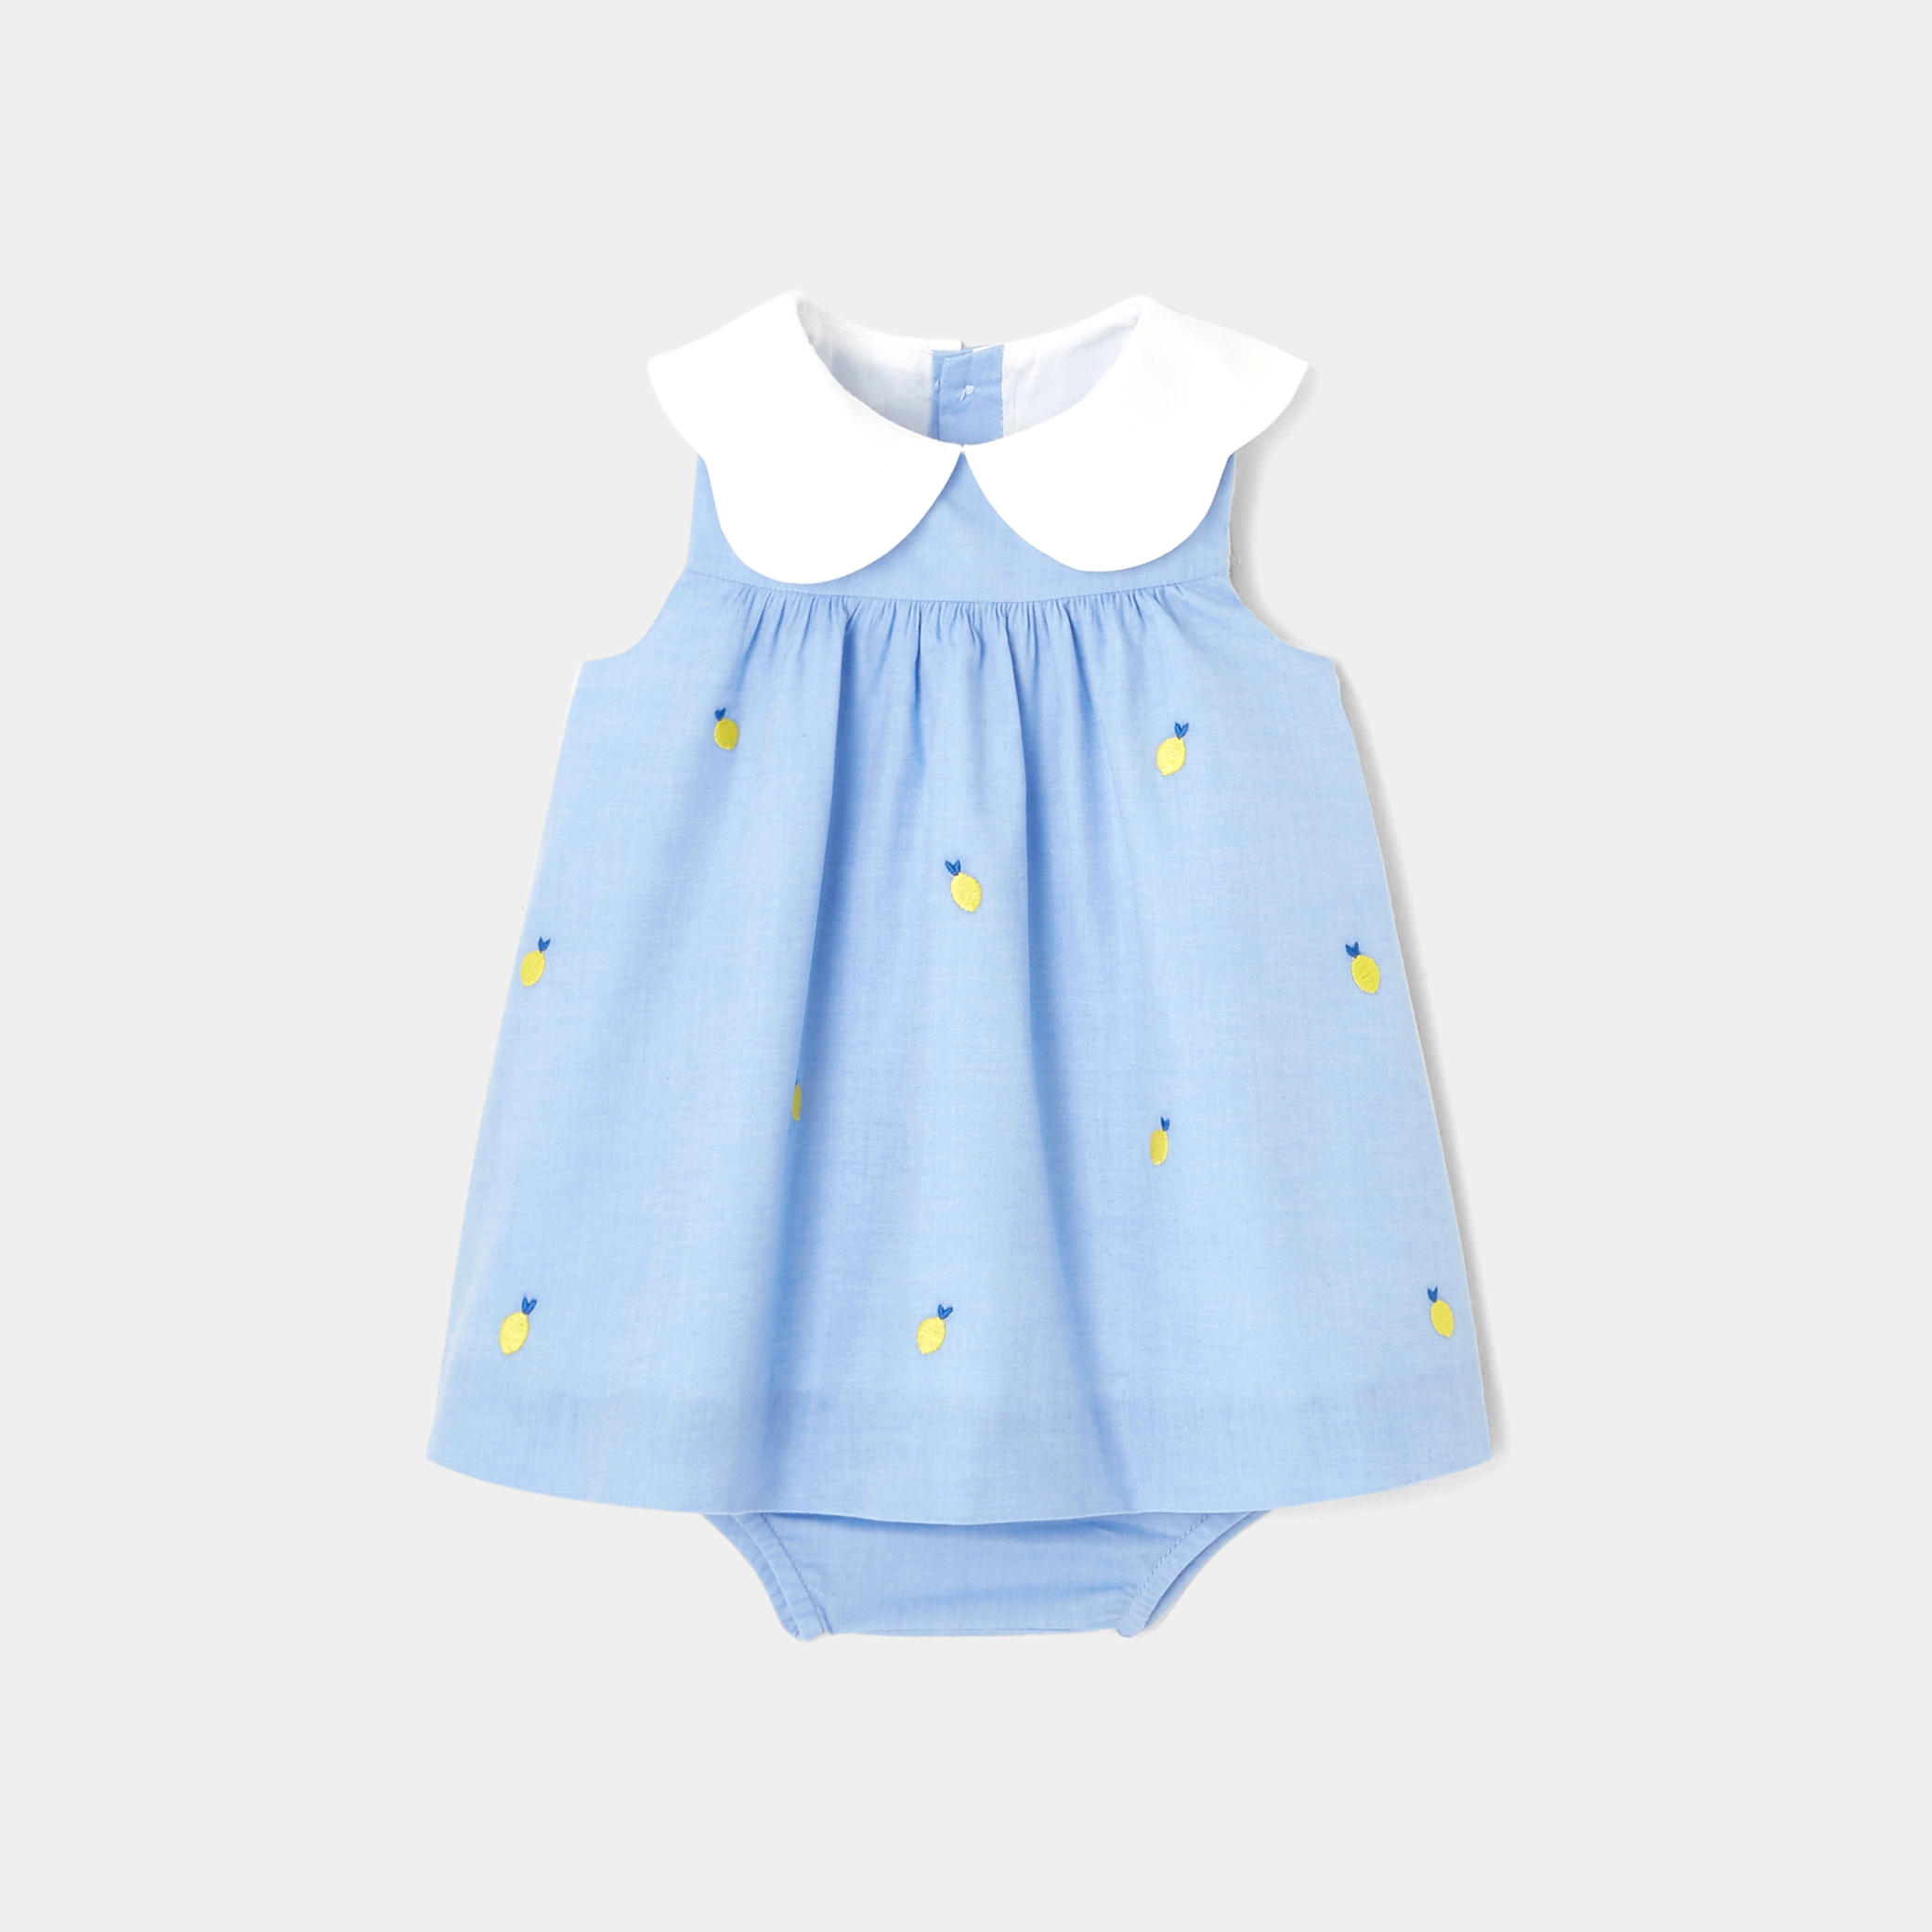 Baby girl end-on-end dress